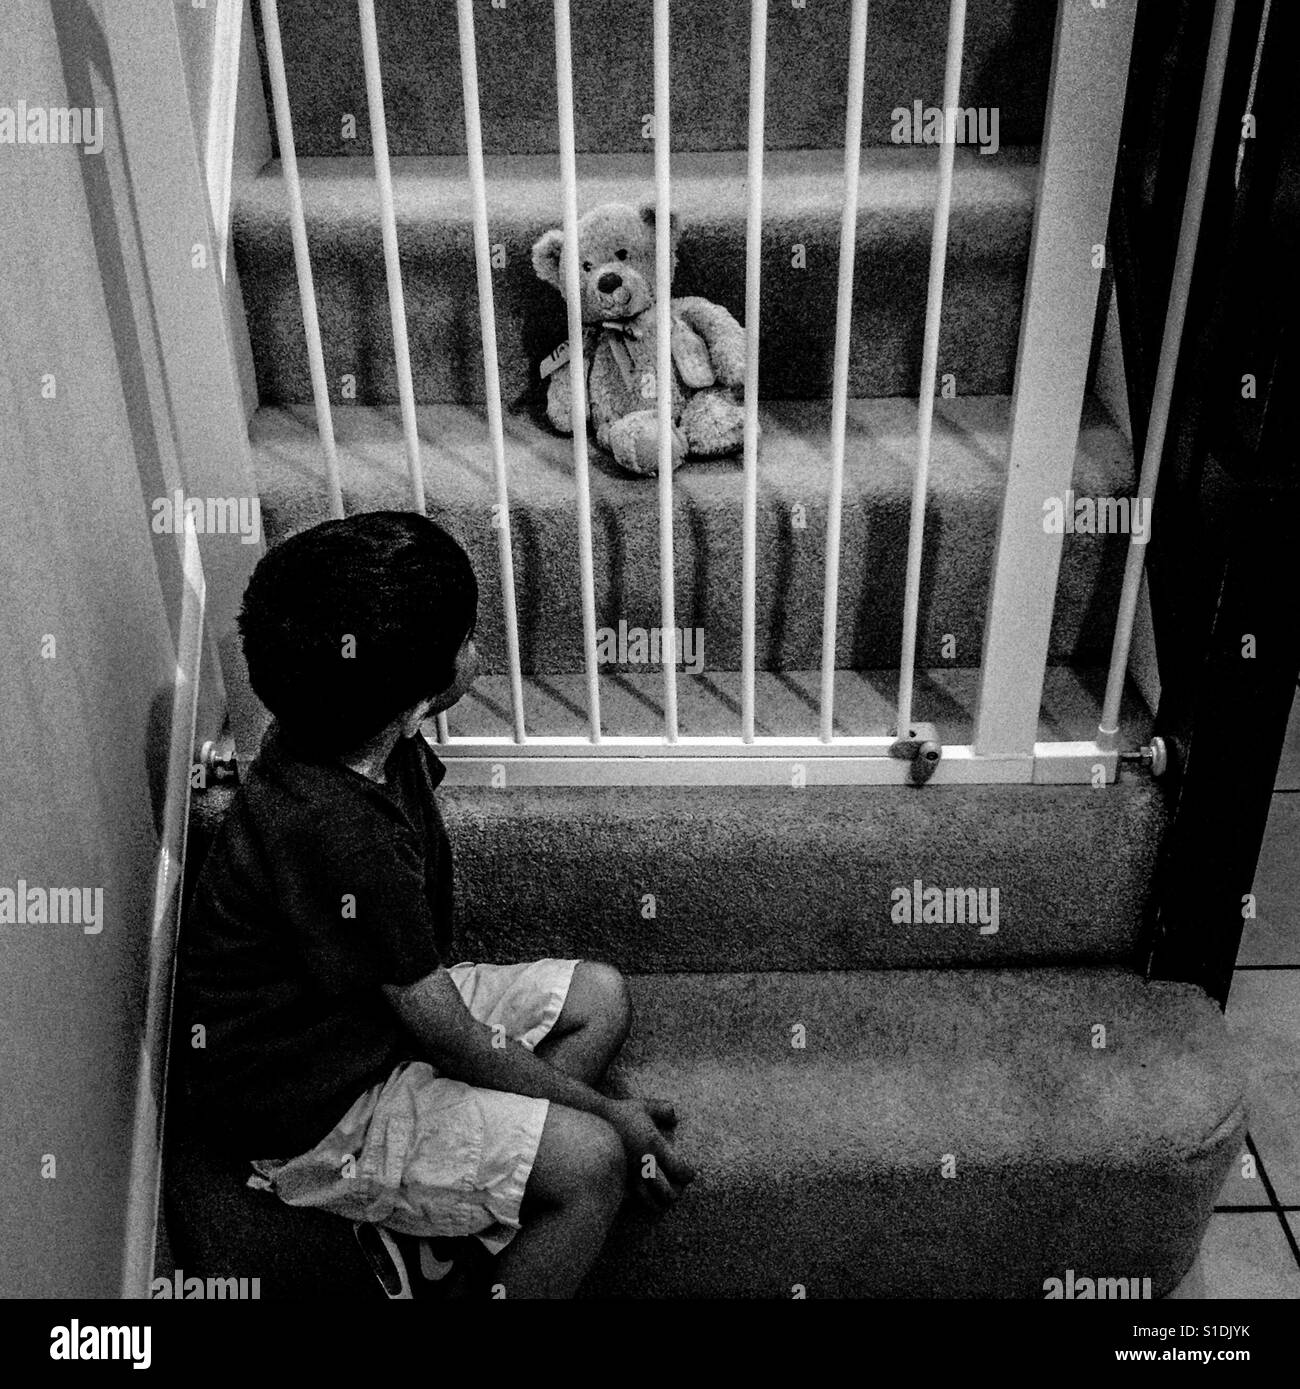 Naughty time and teddy's behind bars!! The child longs for him... Stock Photo